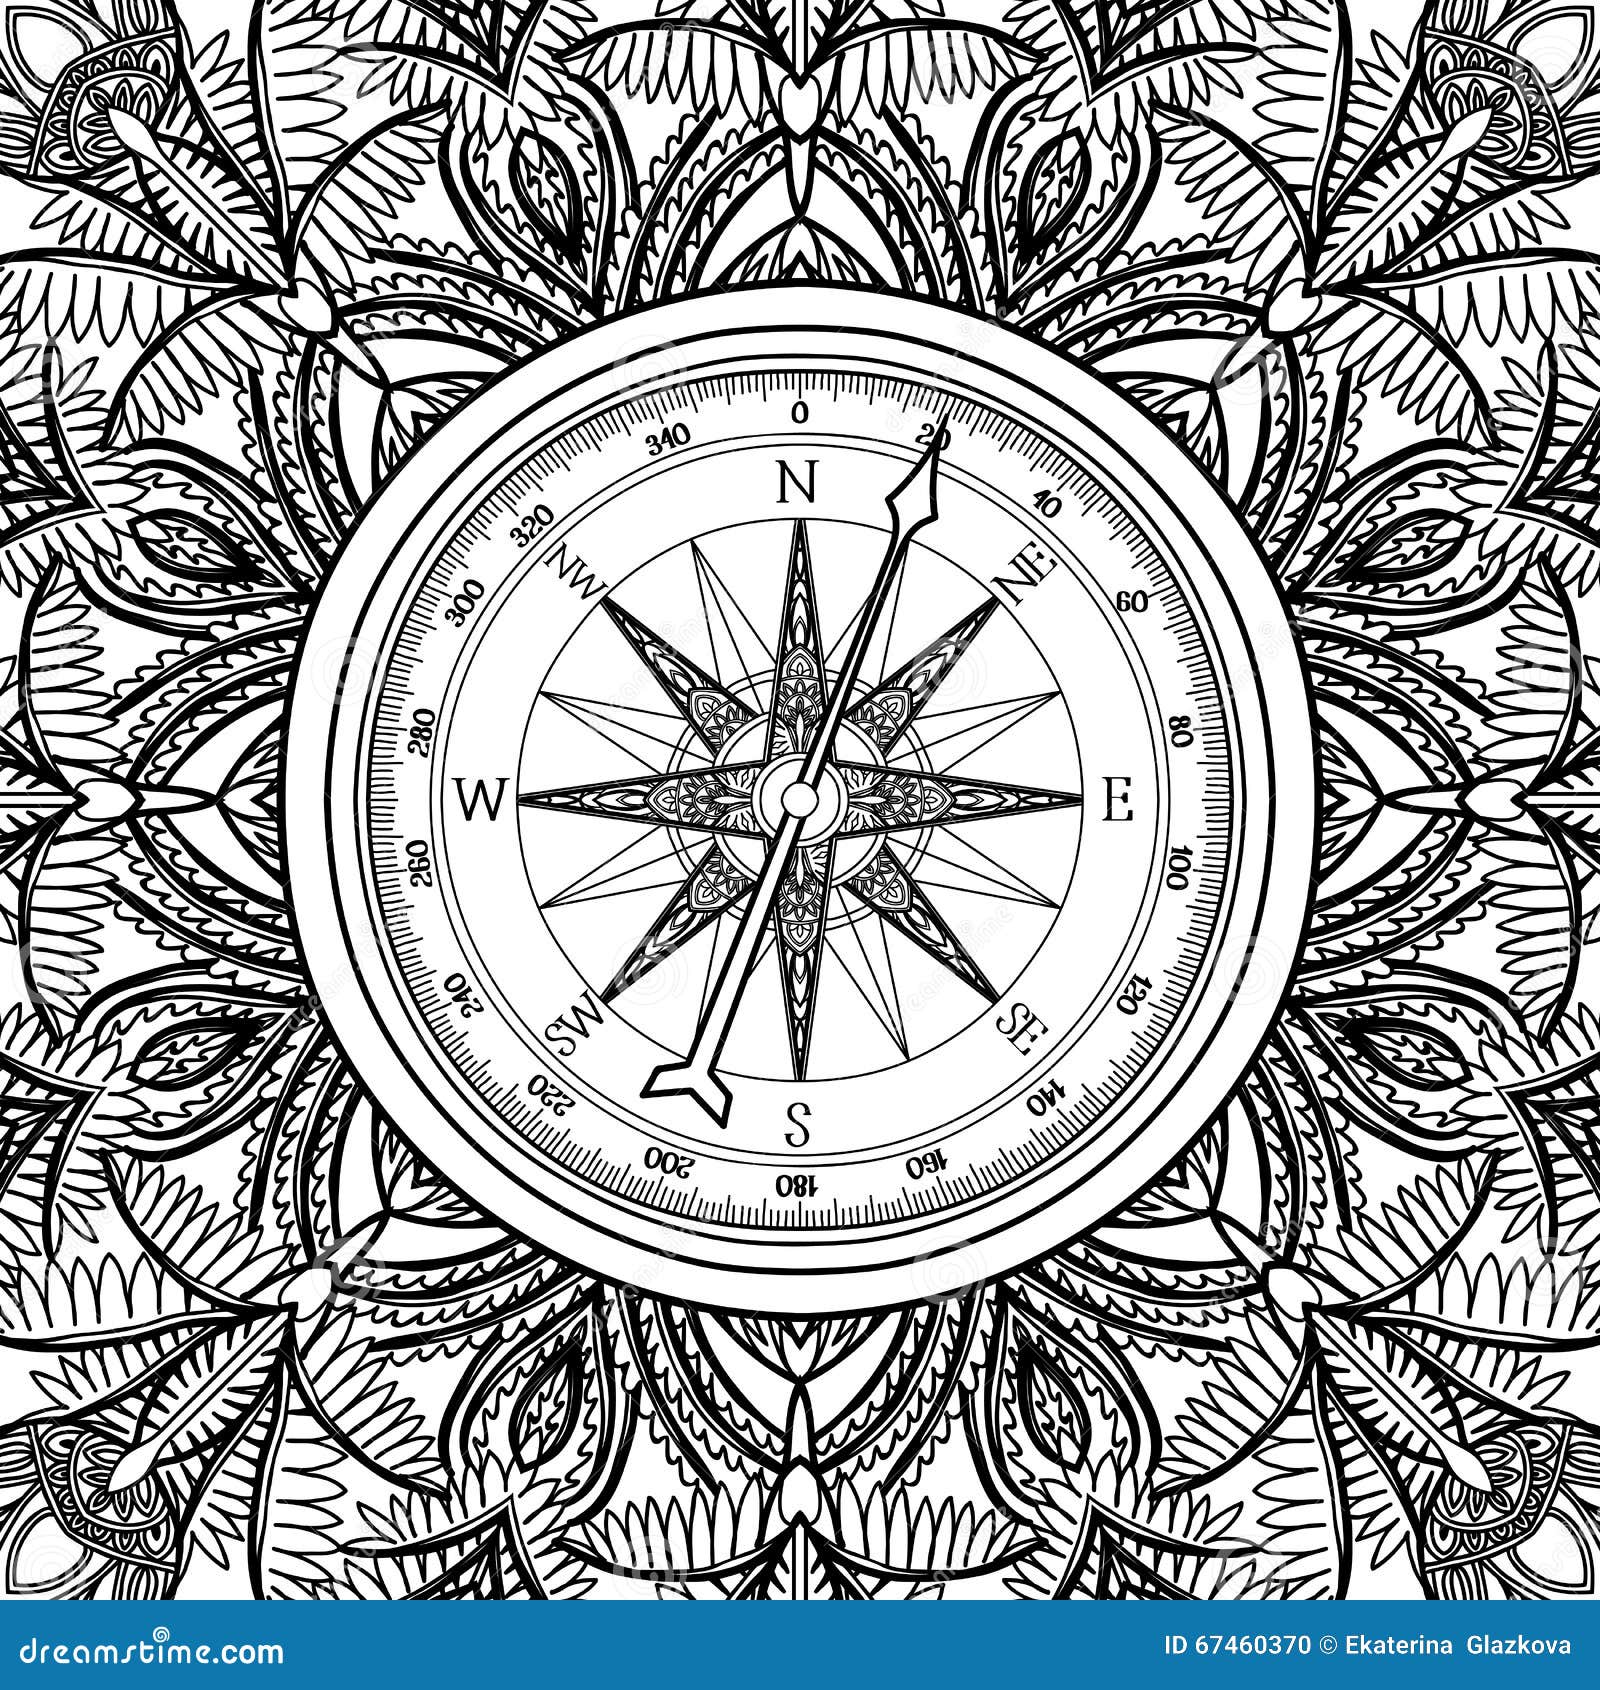 Graphic Wind Rose Compass Stock Vector - Image: 67460370